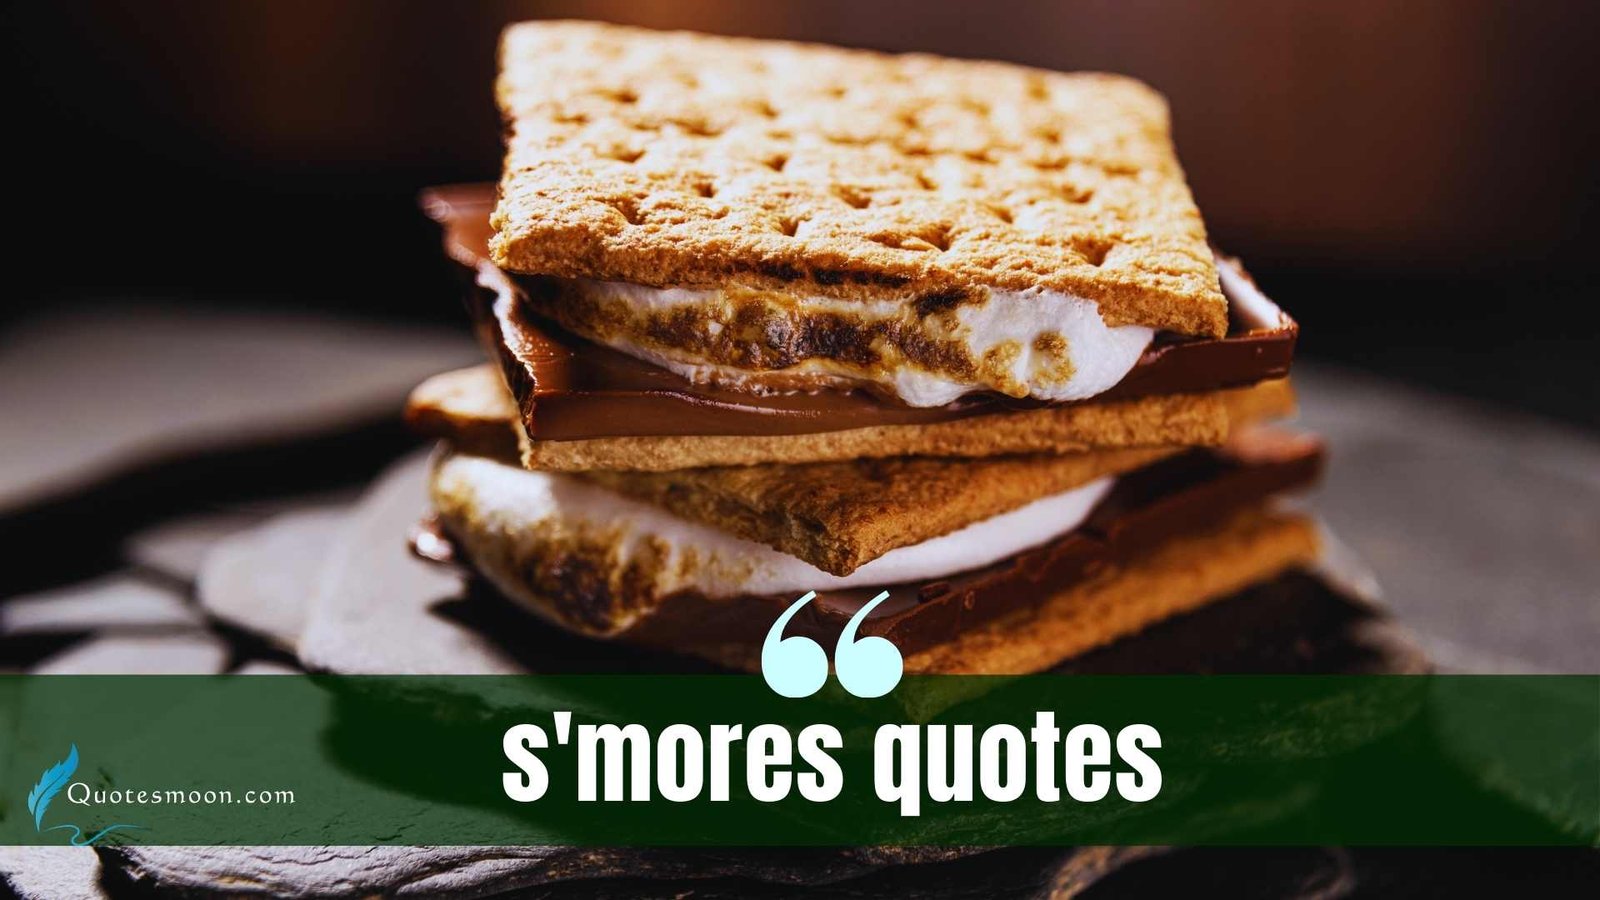 s'mores quotes images